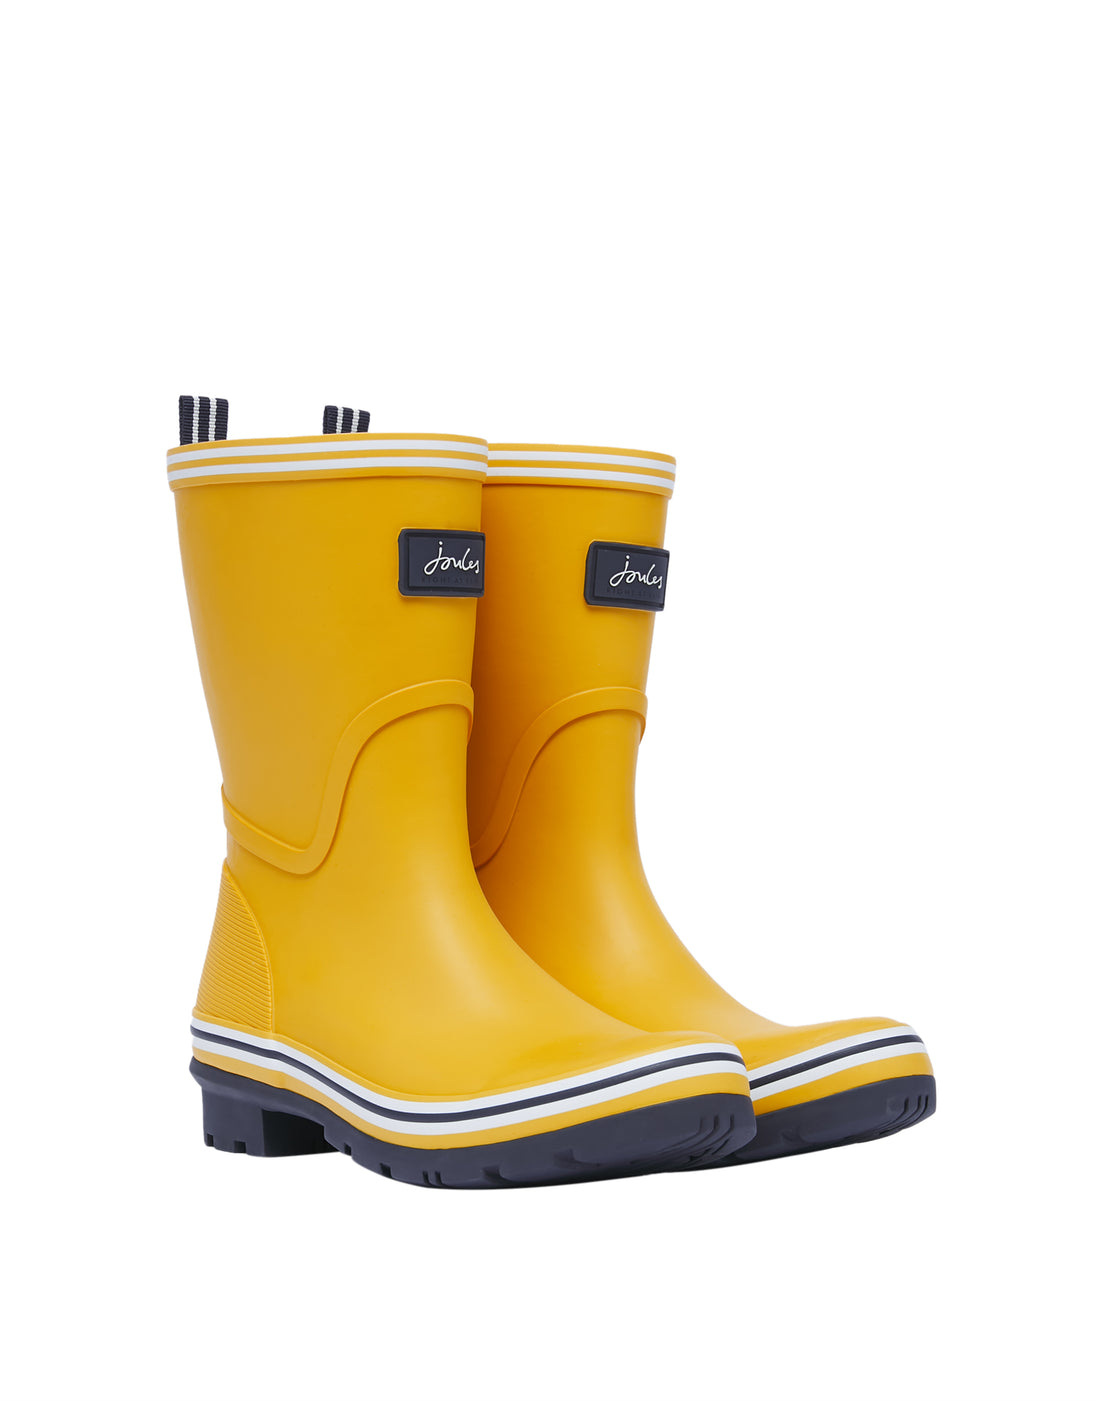 Coastal Mid Height Wellies - Antique Gold